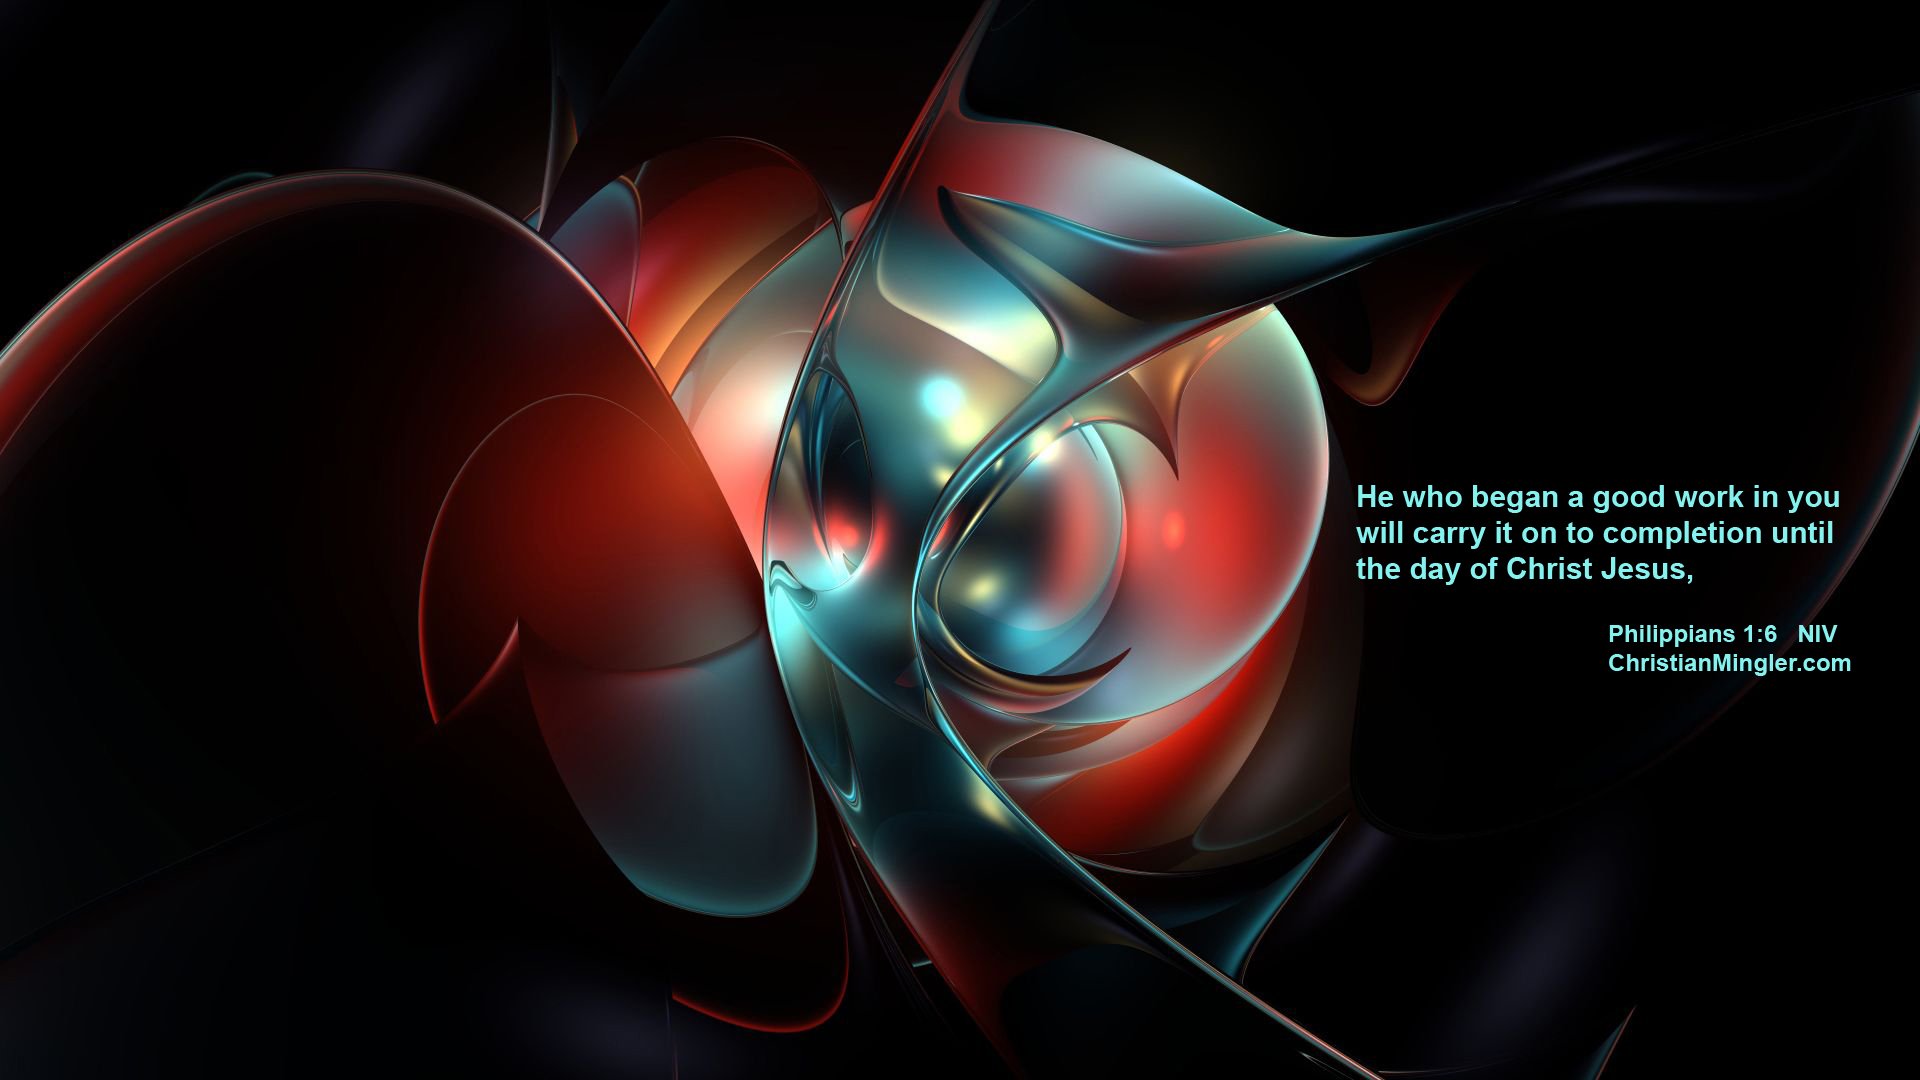 Abstract Religious Art Wallpapers